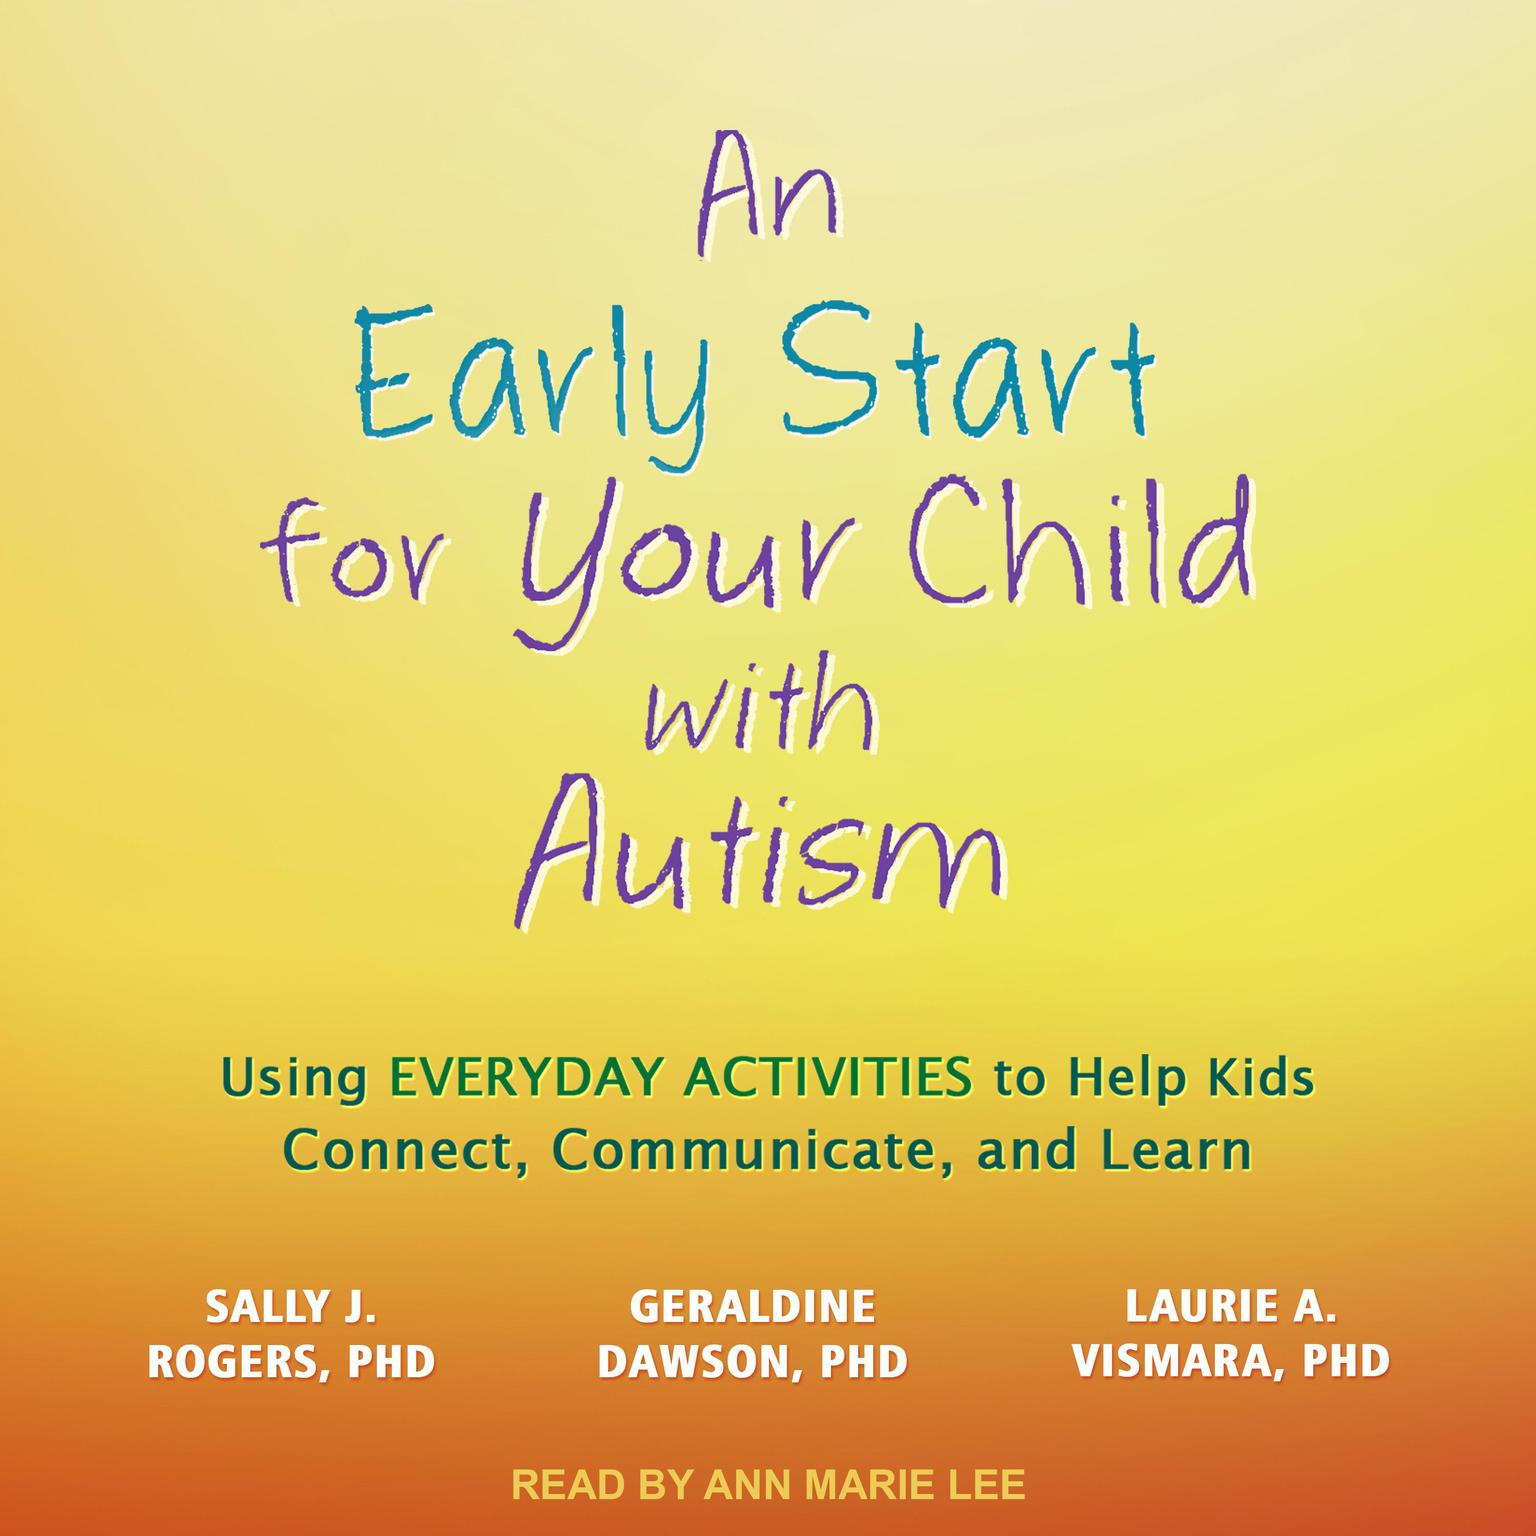 An Early Start for Your Child with Autism: Using Everyday Activities to Help Kids Connect, Communicate, and Learn Audiobook, by Sally J. Rogers